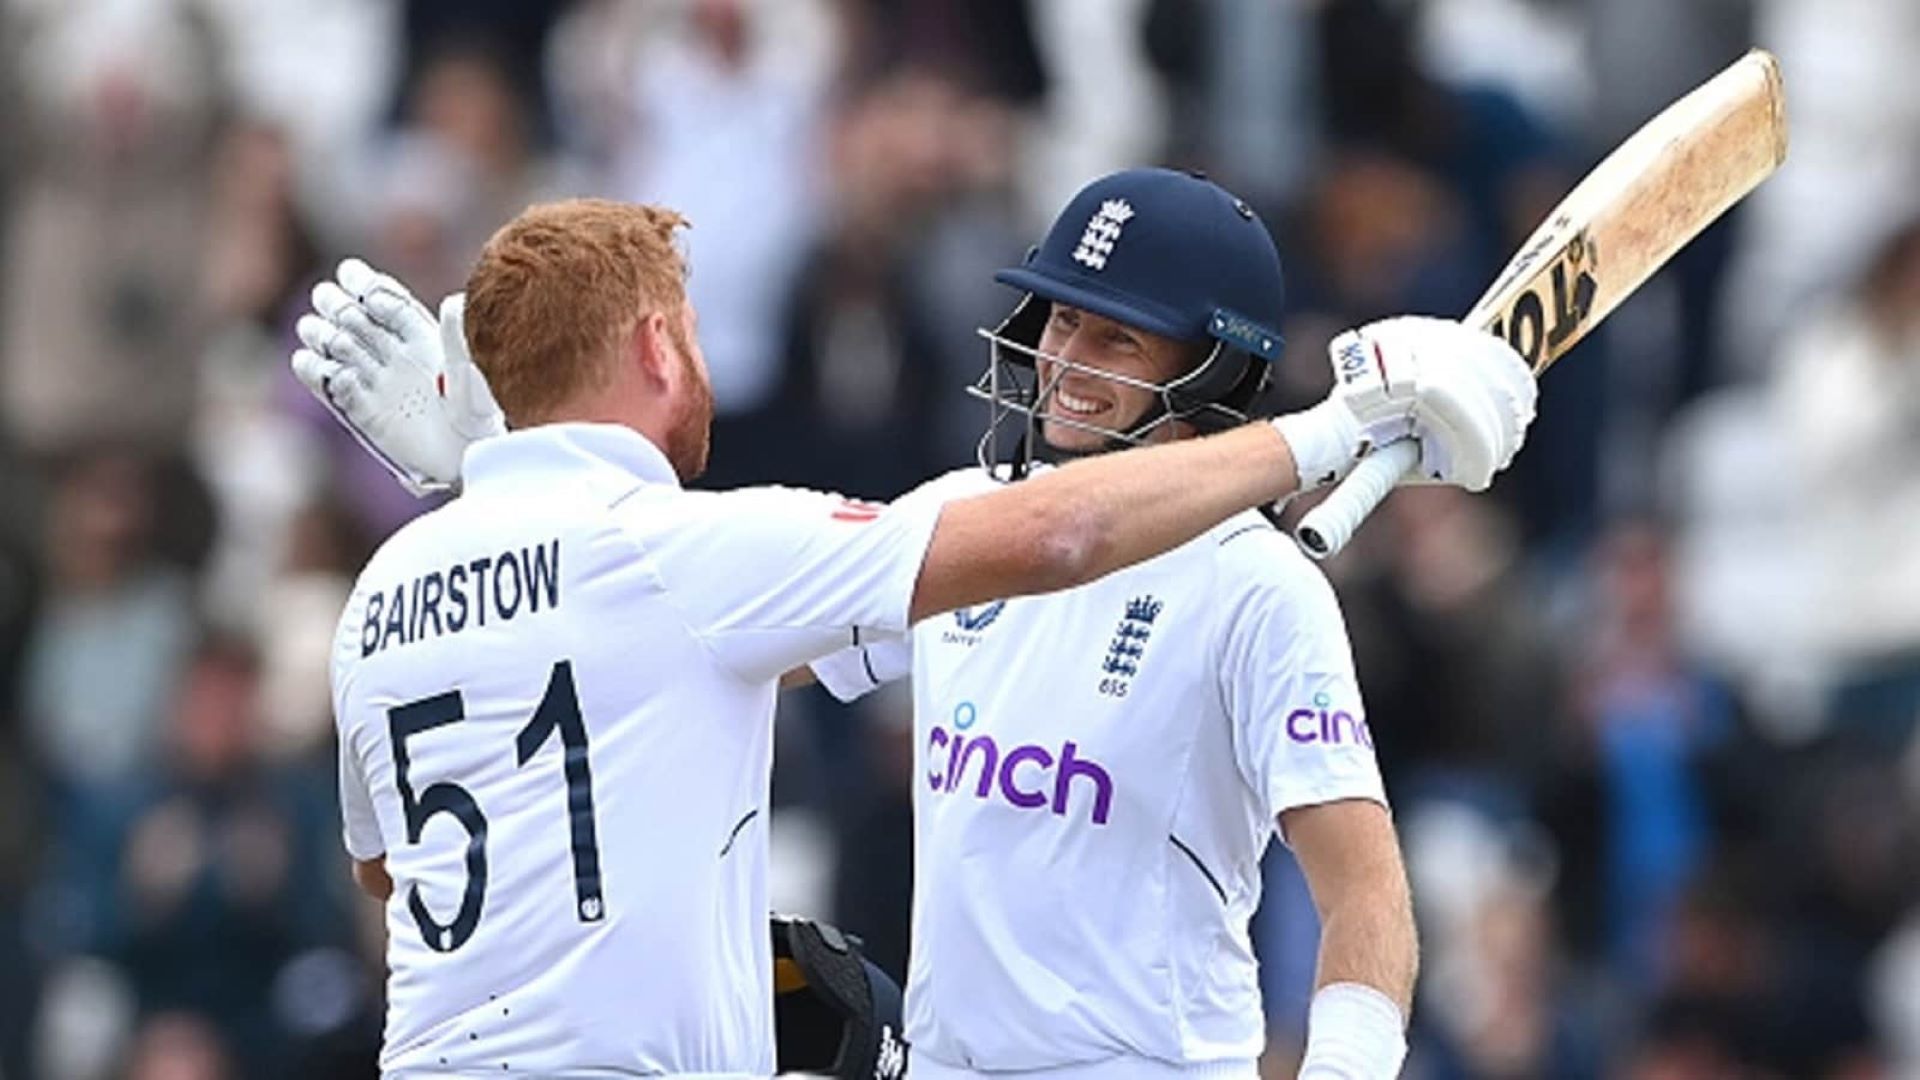 Joe Root and Jonny Bairstow starred in several tight run-chases last summer